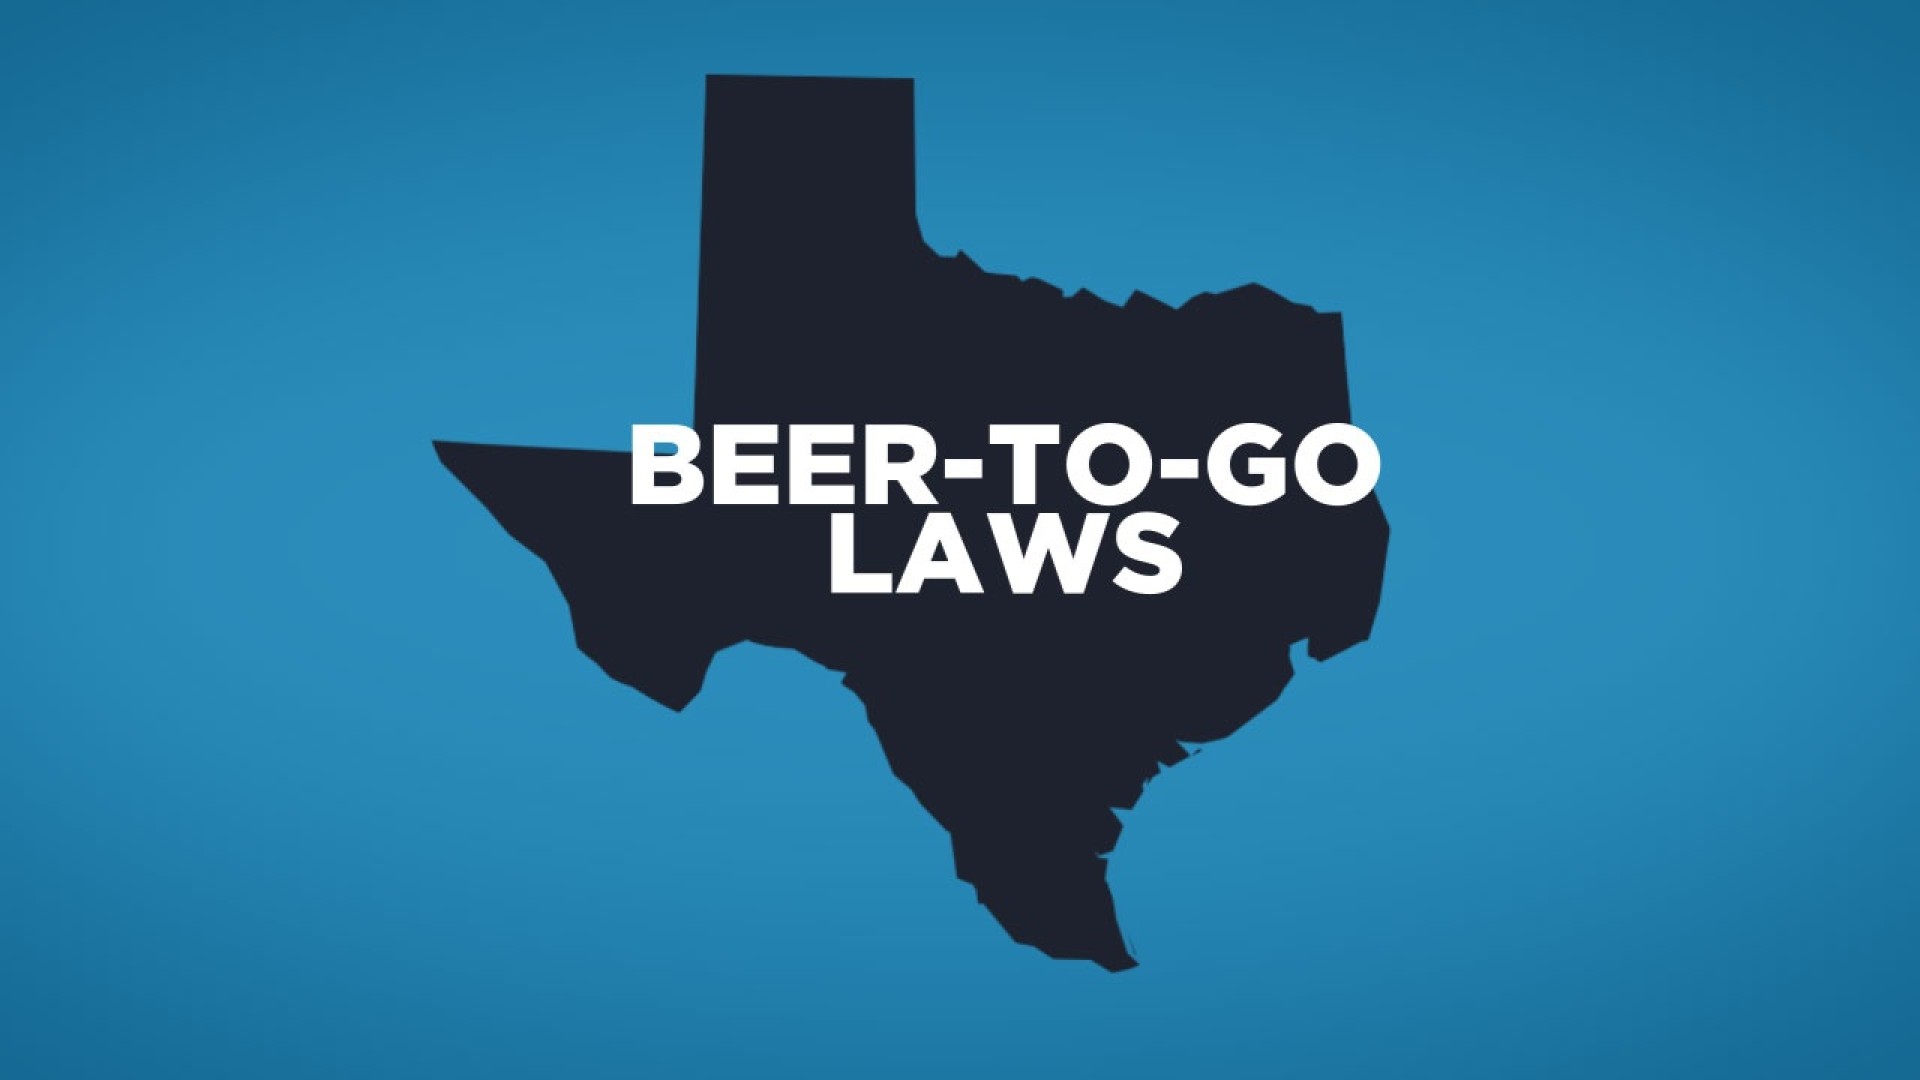 Governor Abbott Waives Certain Regulations To Allow Delivery Of Alcohol From Restaurants And To Support Hospitality Industry